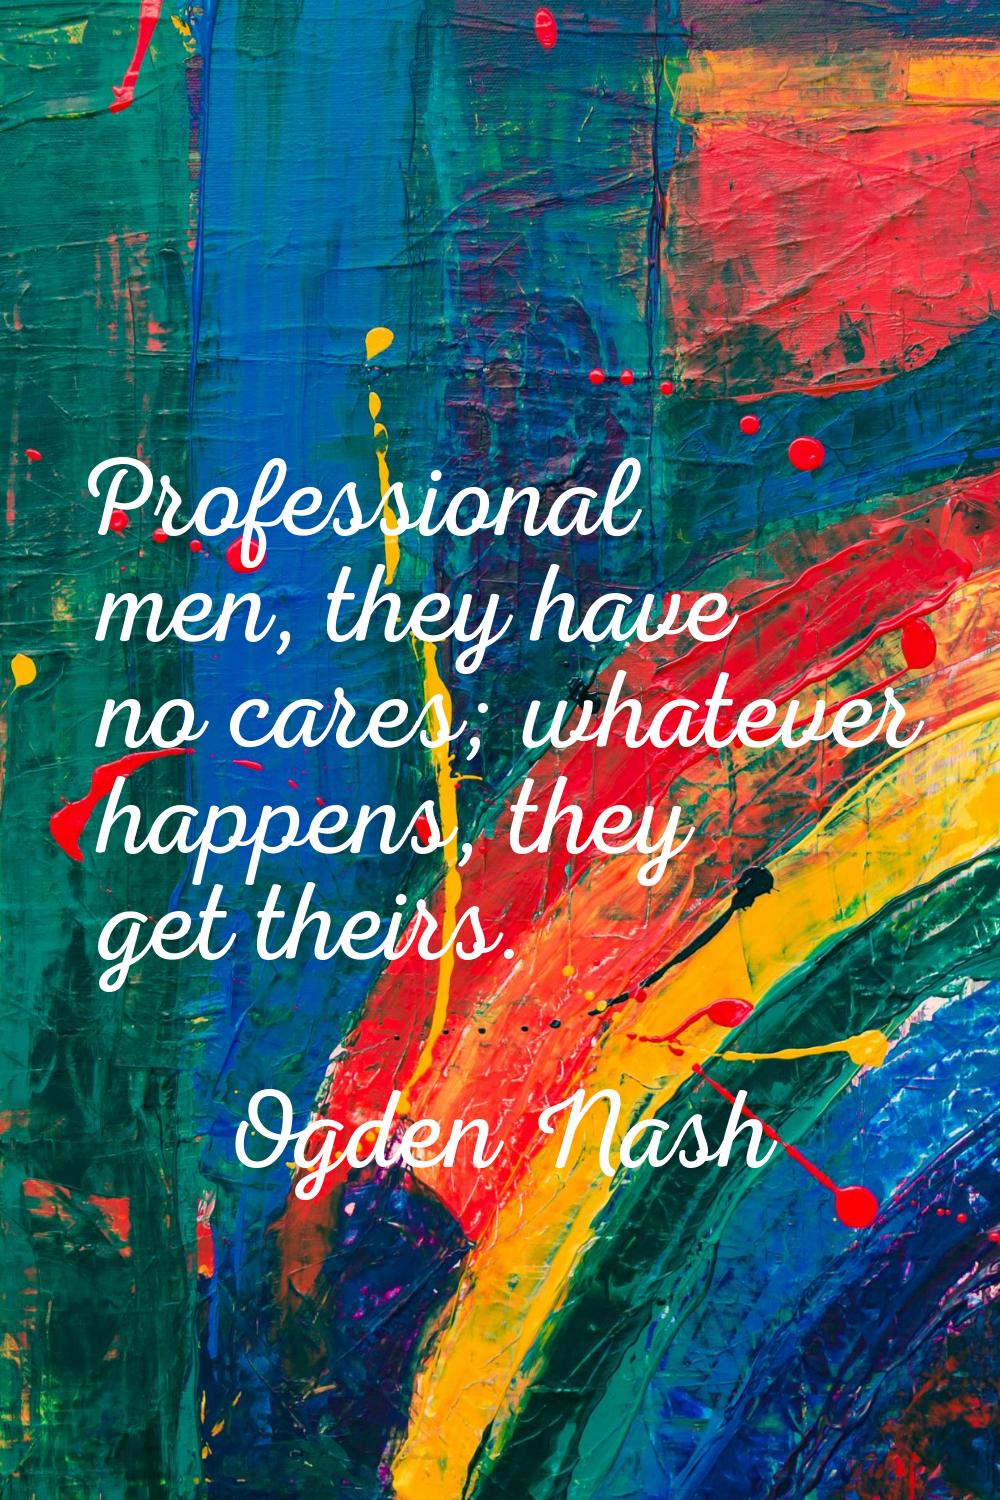 Professional men, they have no cares; whatever happens, they get theirs.